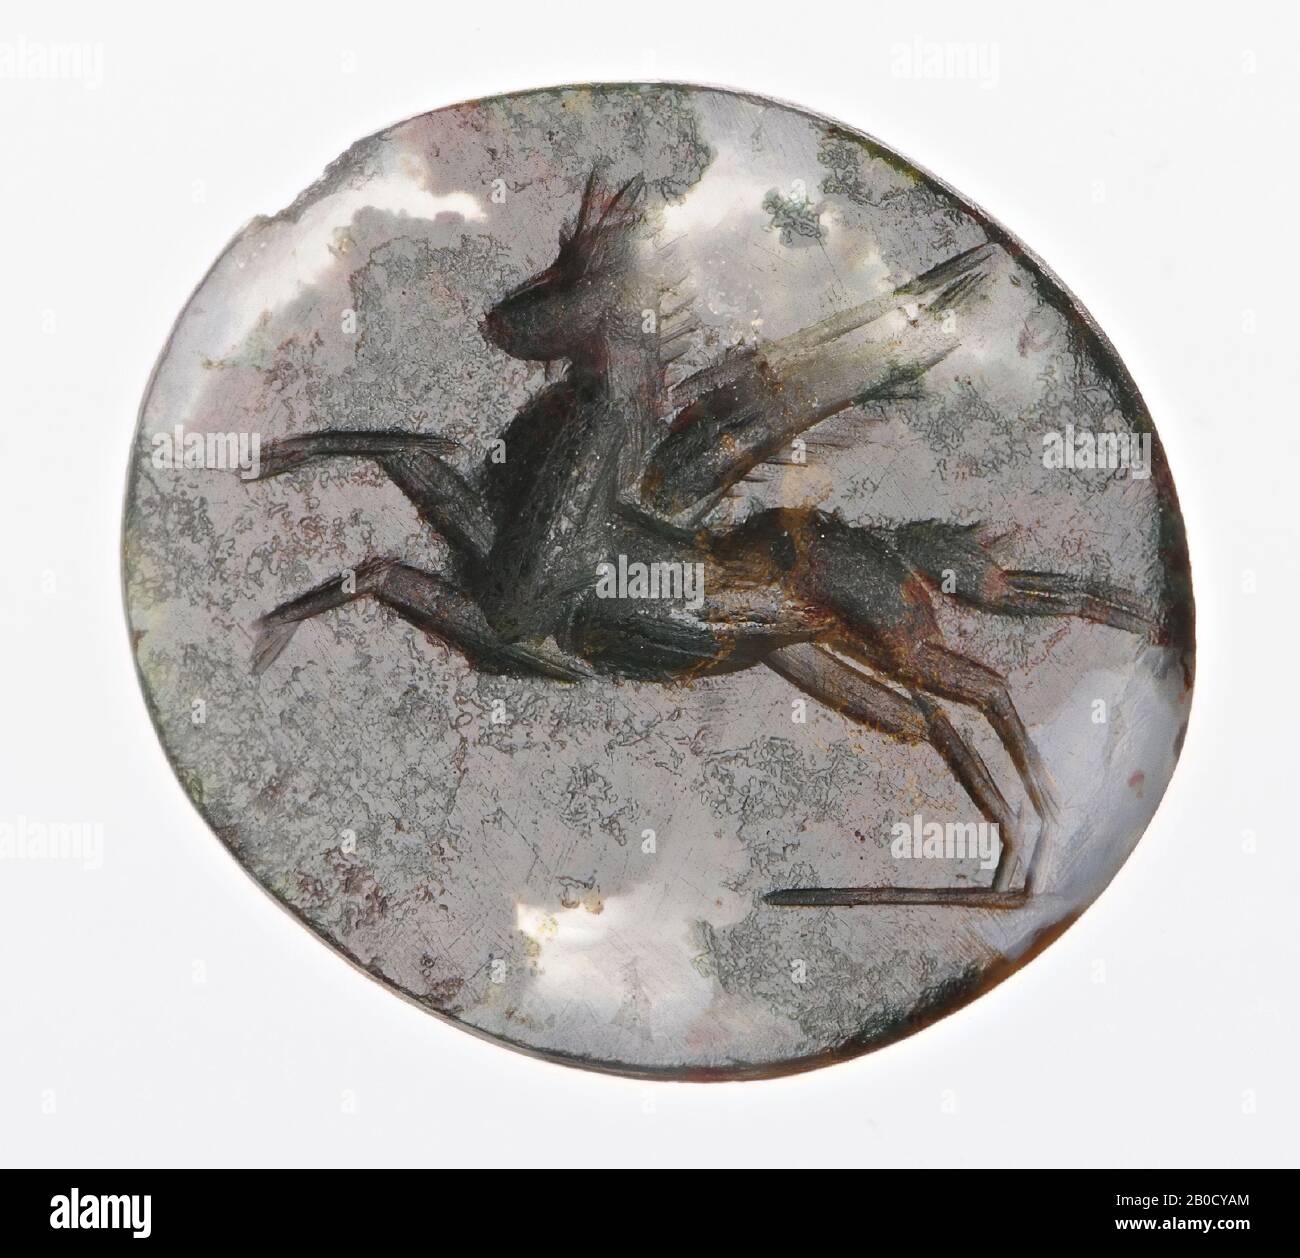 Vz: the horse has its hind legs on the ground, the forelegs are stretched out in the air., Gem, intaglio, ringstone, heliotrope or agate, Color: red, Shape: round, Processing: back convex, coarse streaky rendering with a thick rounded wheel, no detailing., 12 x 7 mm, D. 2 mm, 2nd - 3rd century AD. 100-300 AD Stock Photo